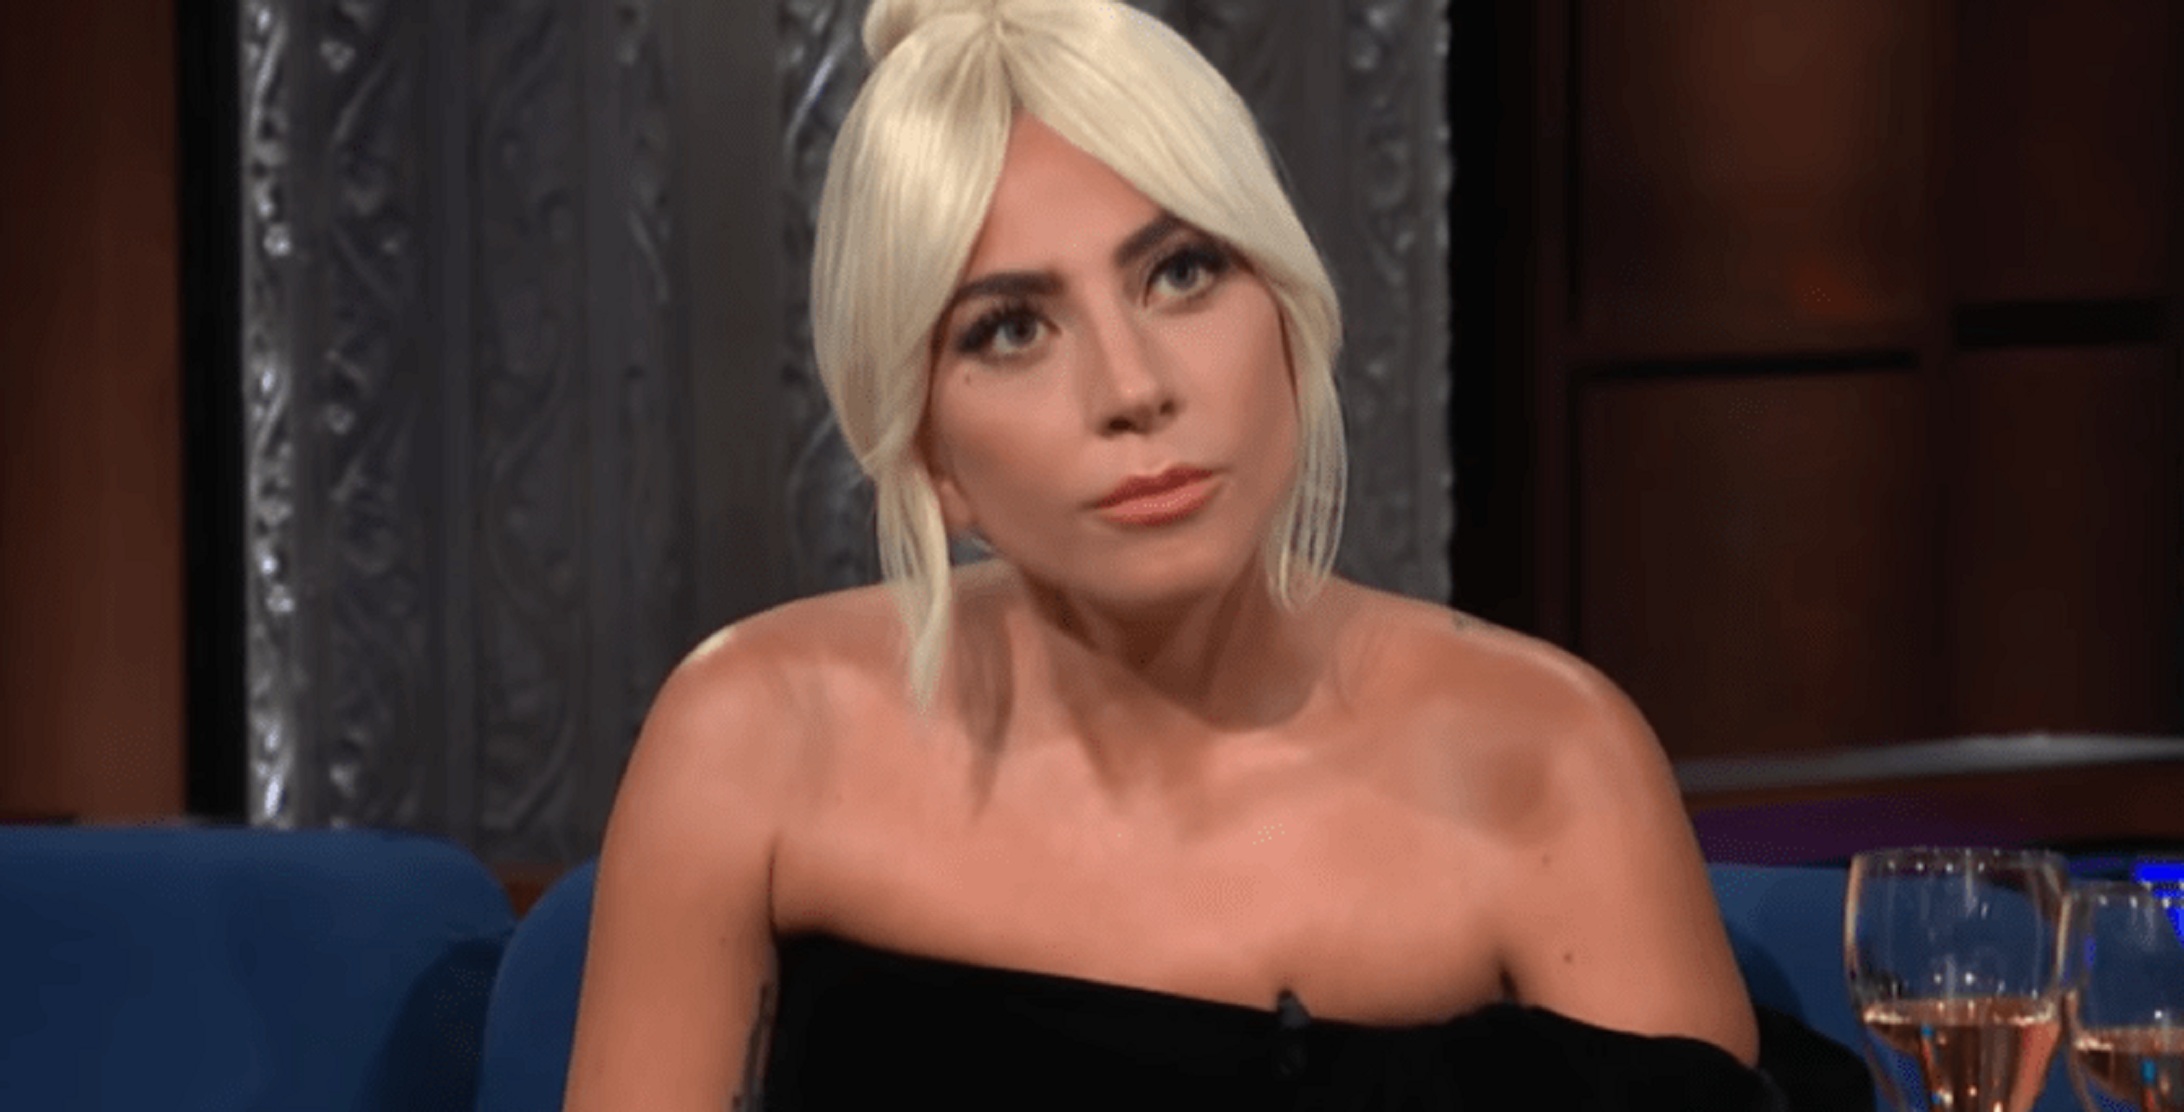 “I am a sexual assault survivor”: Lady Gaga Gives Emotional Response In Kavanaugh-Ford Case